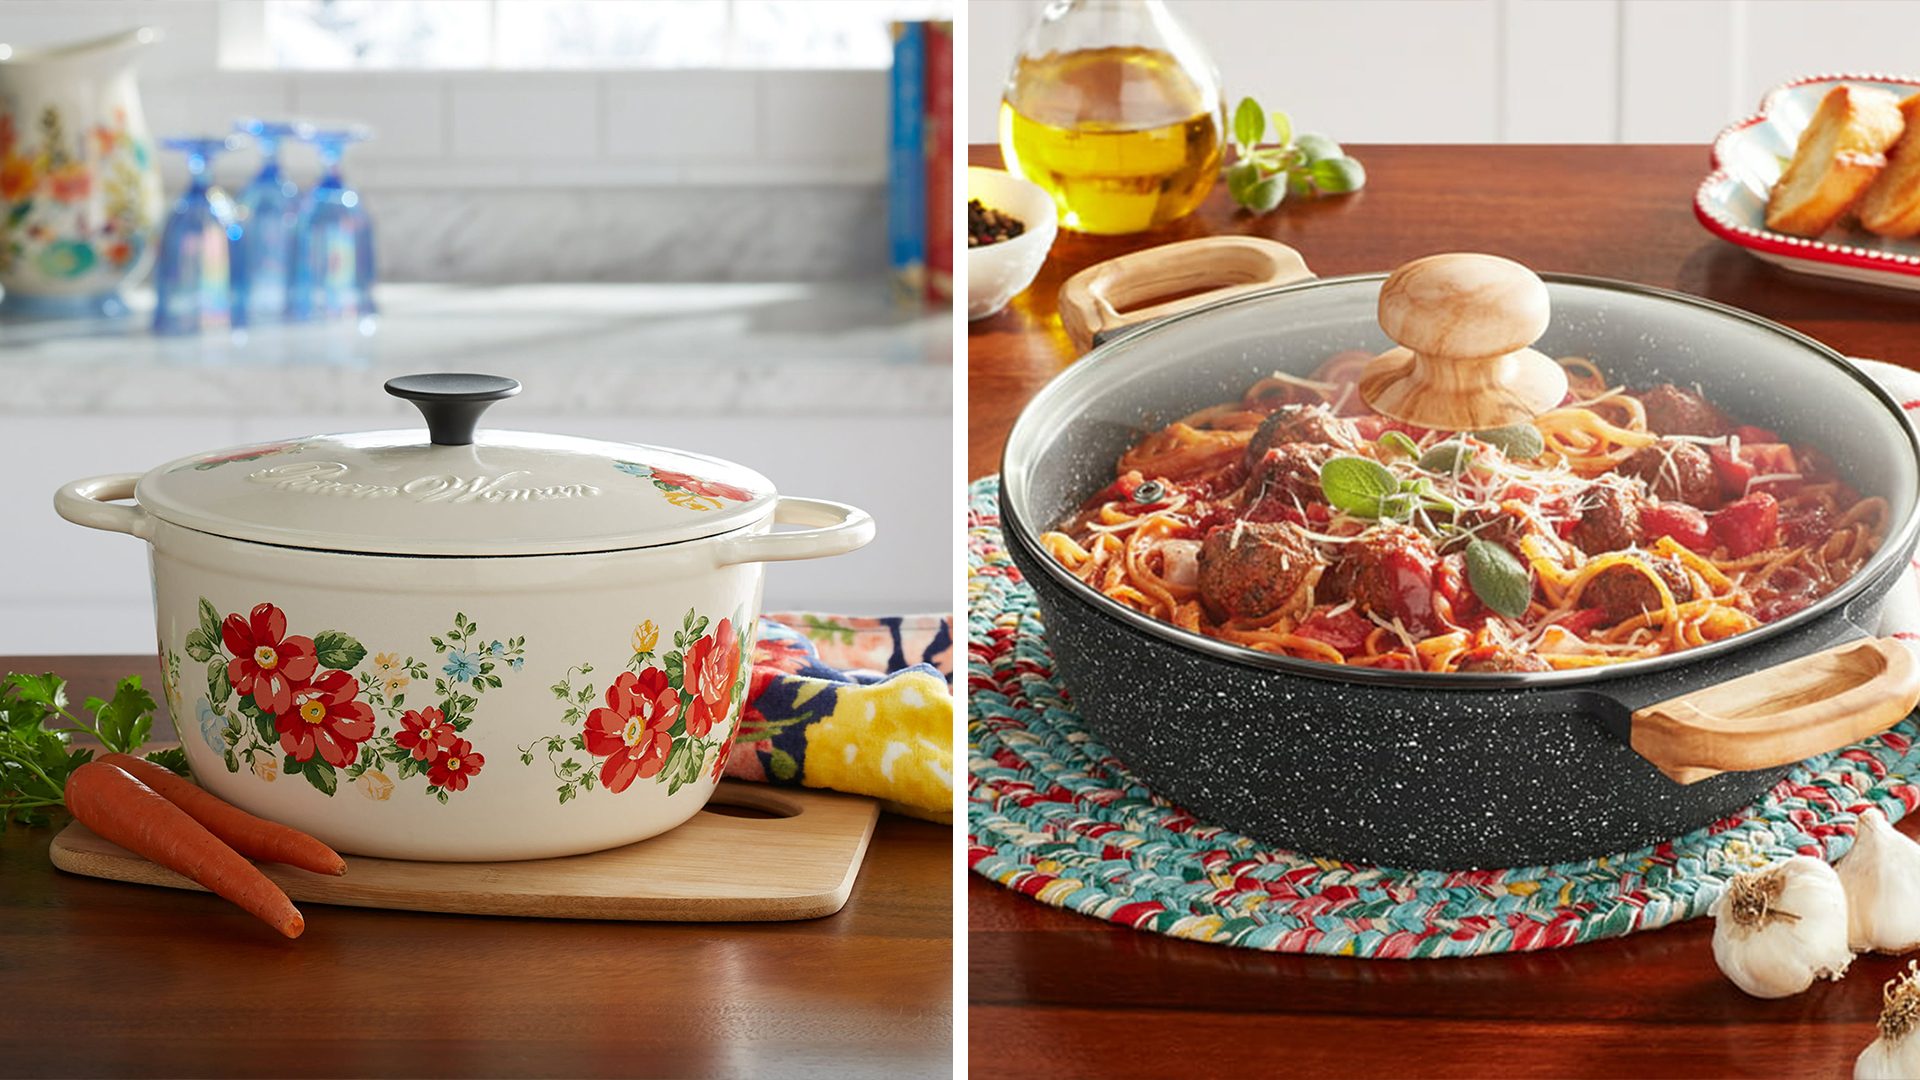 https://www.tasteofhome.com/wp-content/uploads/2023/06/The-6-Best-Items-From-the-Pioneer-Woman-Cookware-Collection_social_via-amazon.com_.jpg